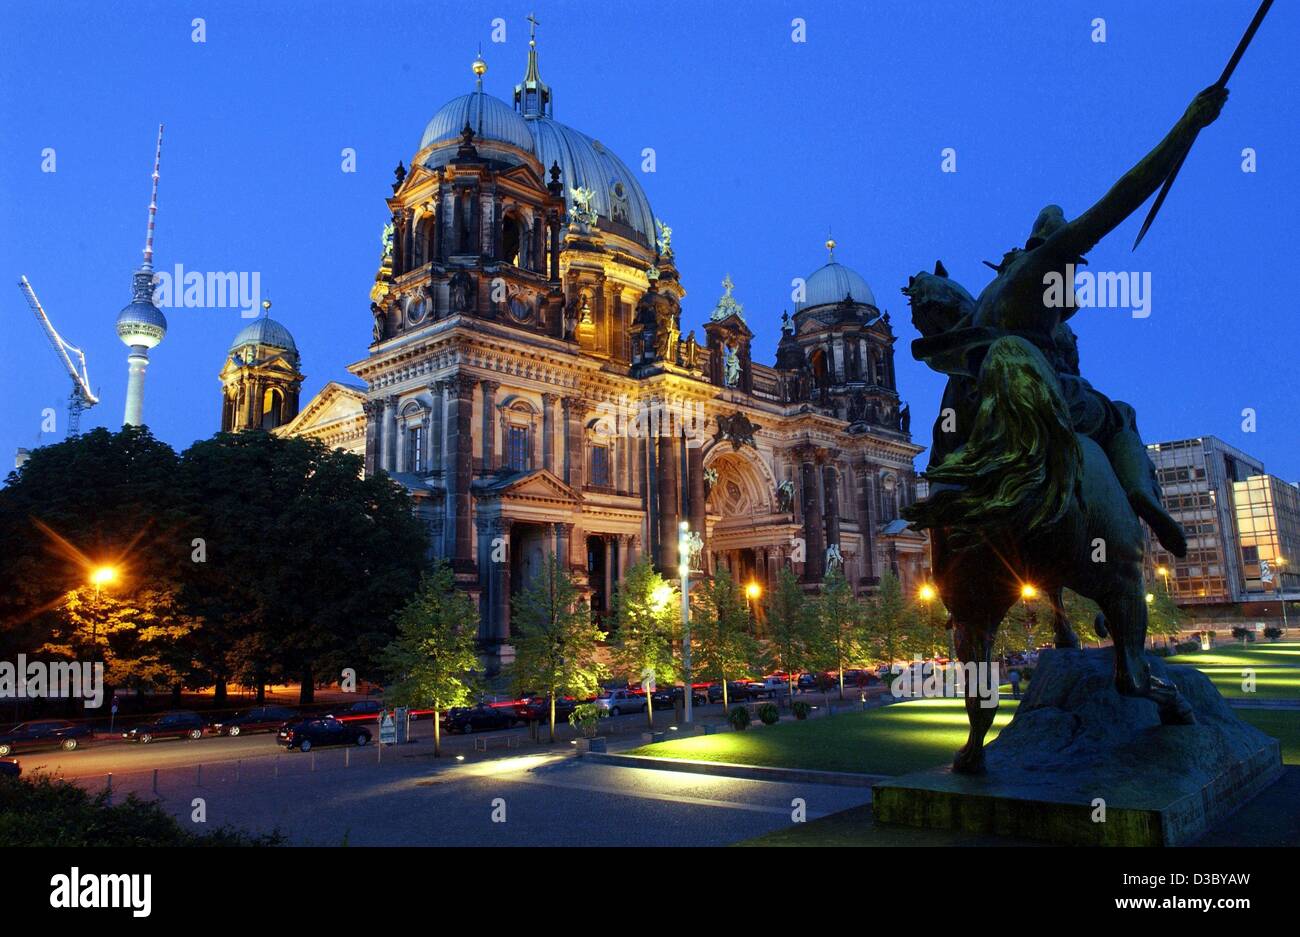 (dpa) - A view of the illuminated Cathedral in Berlin, Germany, 30 June 2003.  It is the former court cathedral of Prussia's royal Hohenzollern family, who ruled the region of the Kurmark Brandenburg from 1412 to 1918 and who reigned from 1871 as German emperors.  Architect Julius Carl Raschdorff bu Stock Photo